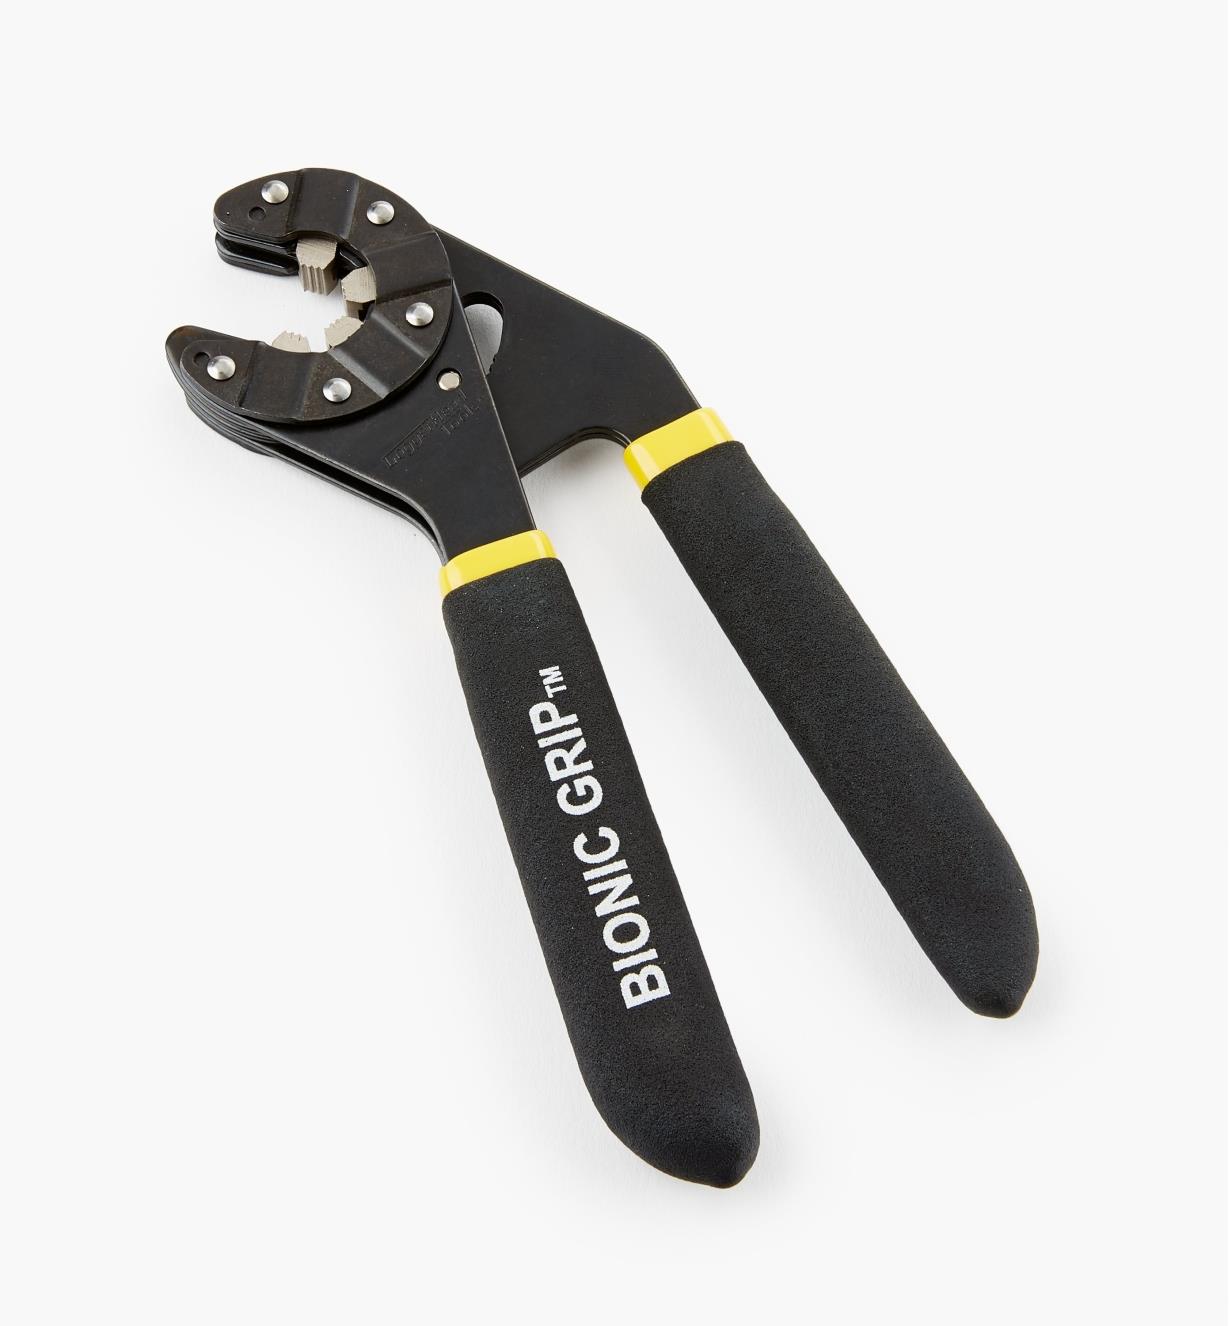 24K2006 - Small Bionic Grip Wrench